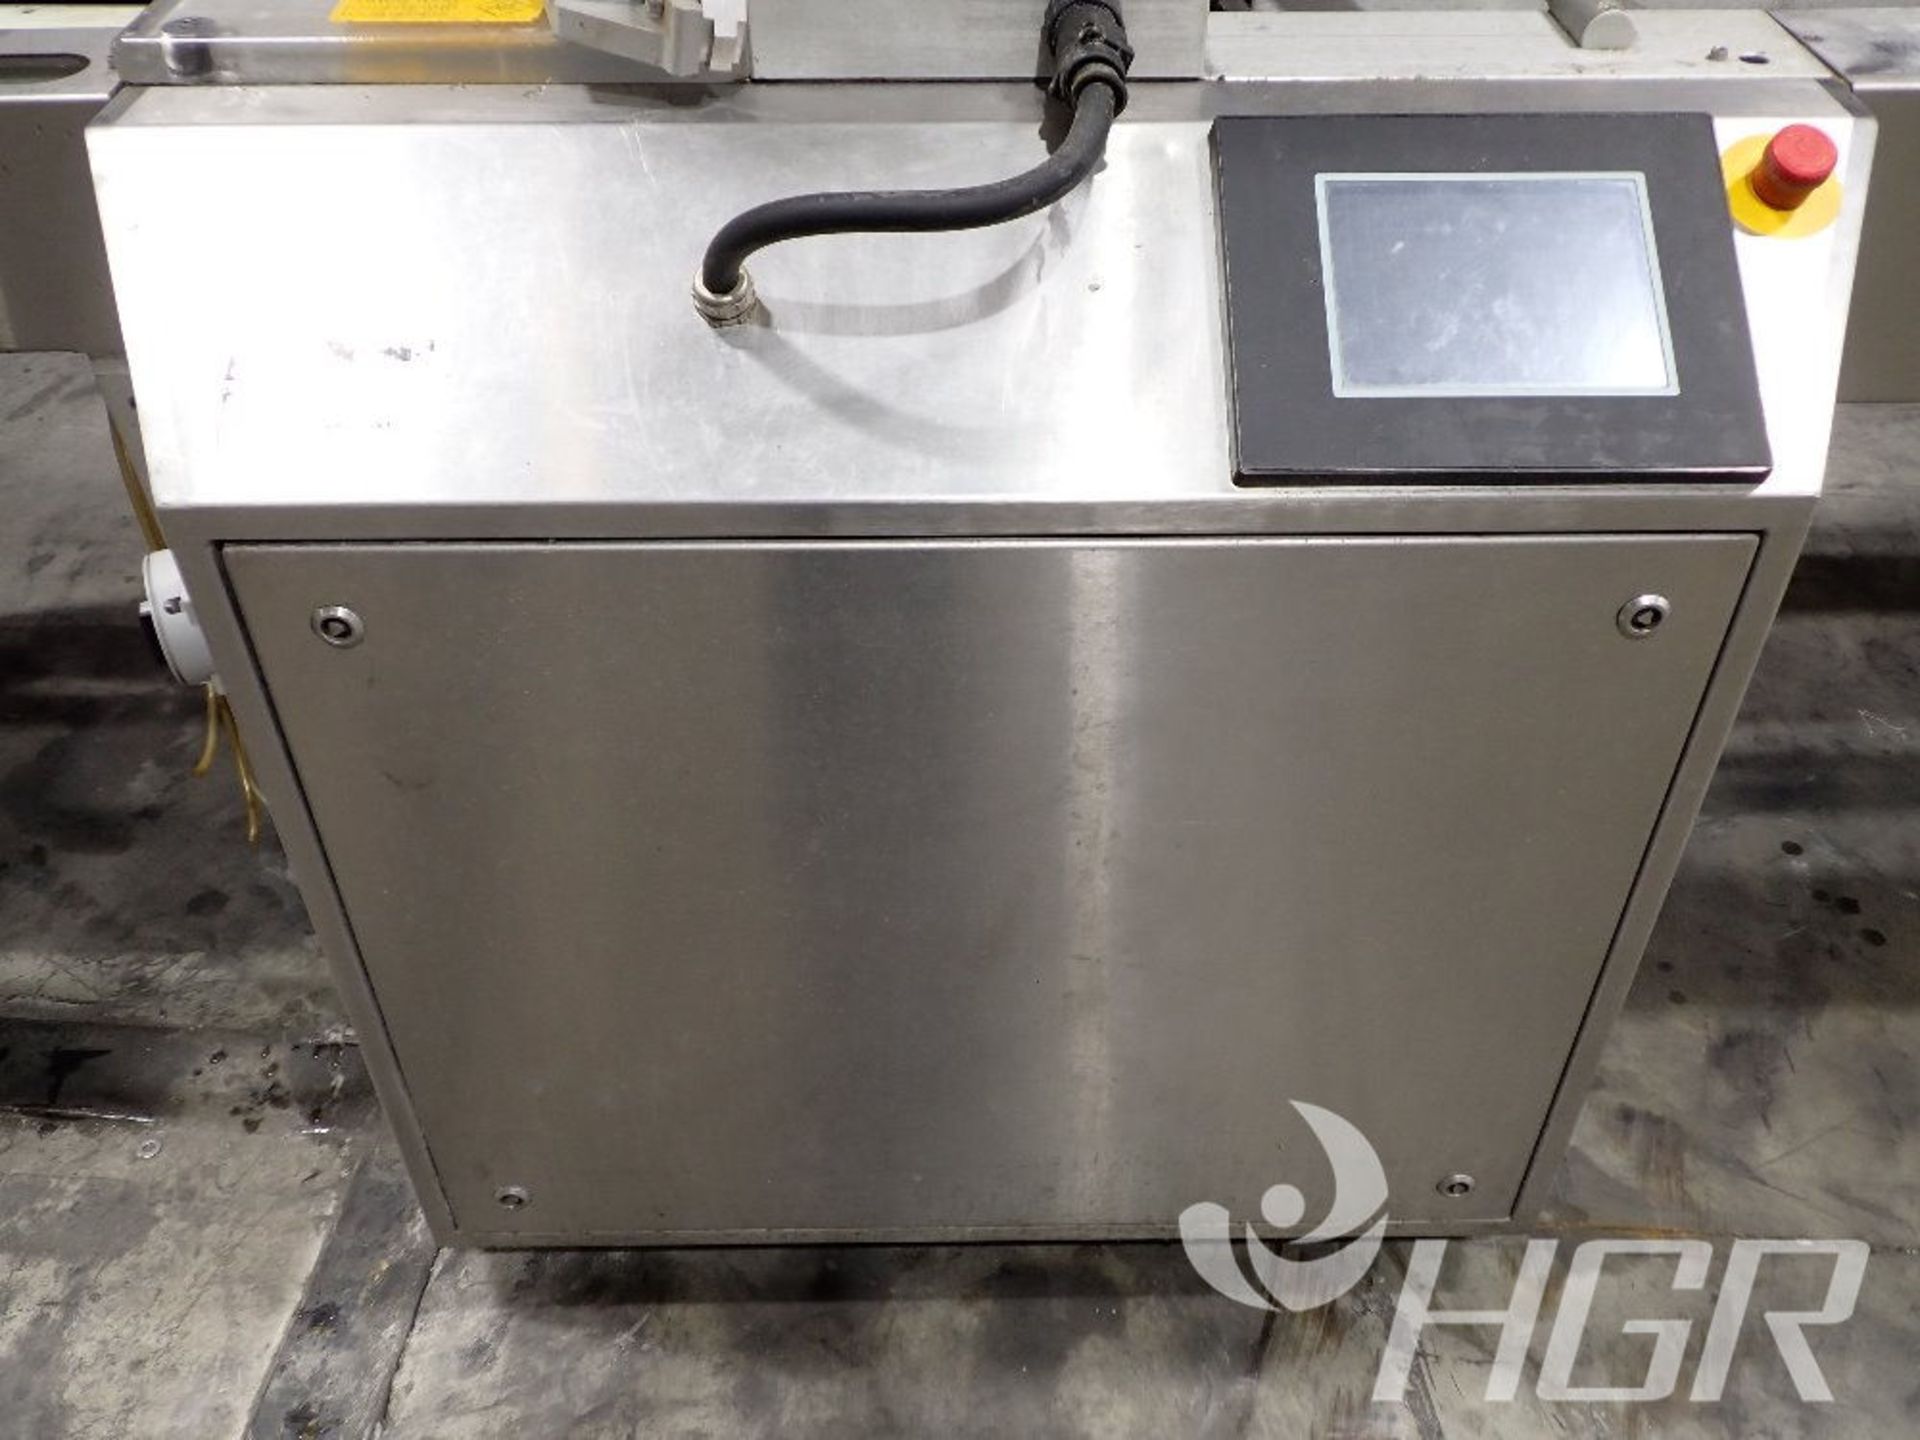 VC999 PACKAGING ROLL FED THERMOFORMER, Model RS420, Date: n/a; s/n RS2005225240, Approx. Capacity: - Image 10 of 14